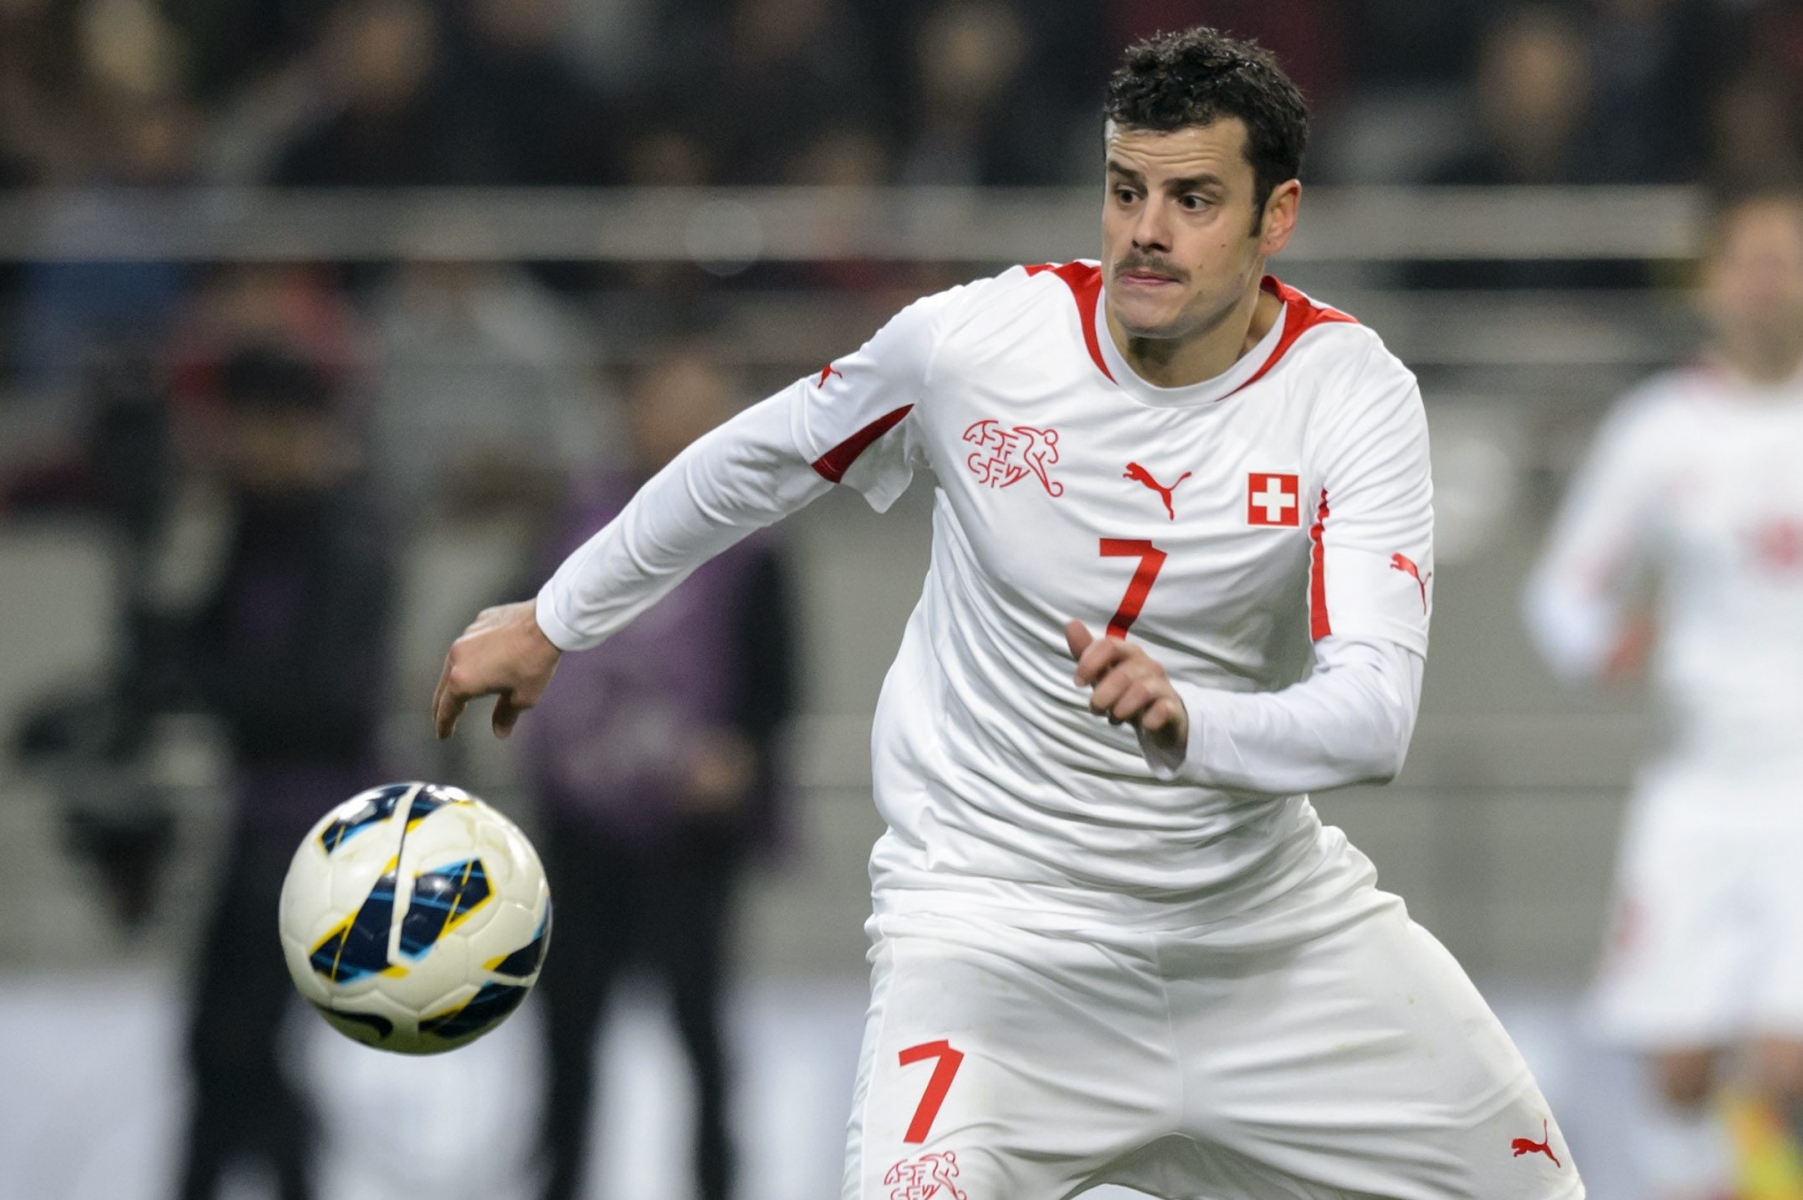 Swiss midfielder Tranquillo Barnetta runs with the ball during an international friendly soccer match between South Korea and Switzerland at the Sangam World Cup stadium in Seoul, South Korea, Friday, November 15, 2013. Switzerland and South Korea are already qualified for the upcoming 2014 Fifa World Cup in Brazil. (KEYSTONE/Laurent Gillieron)